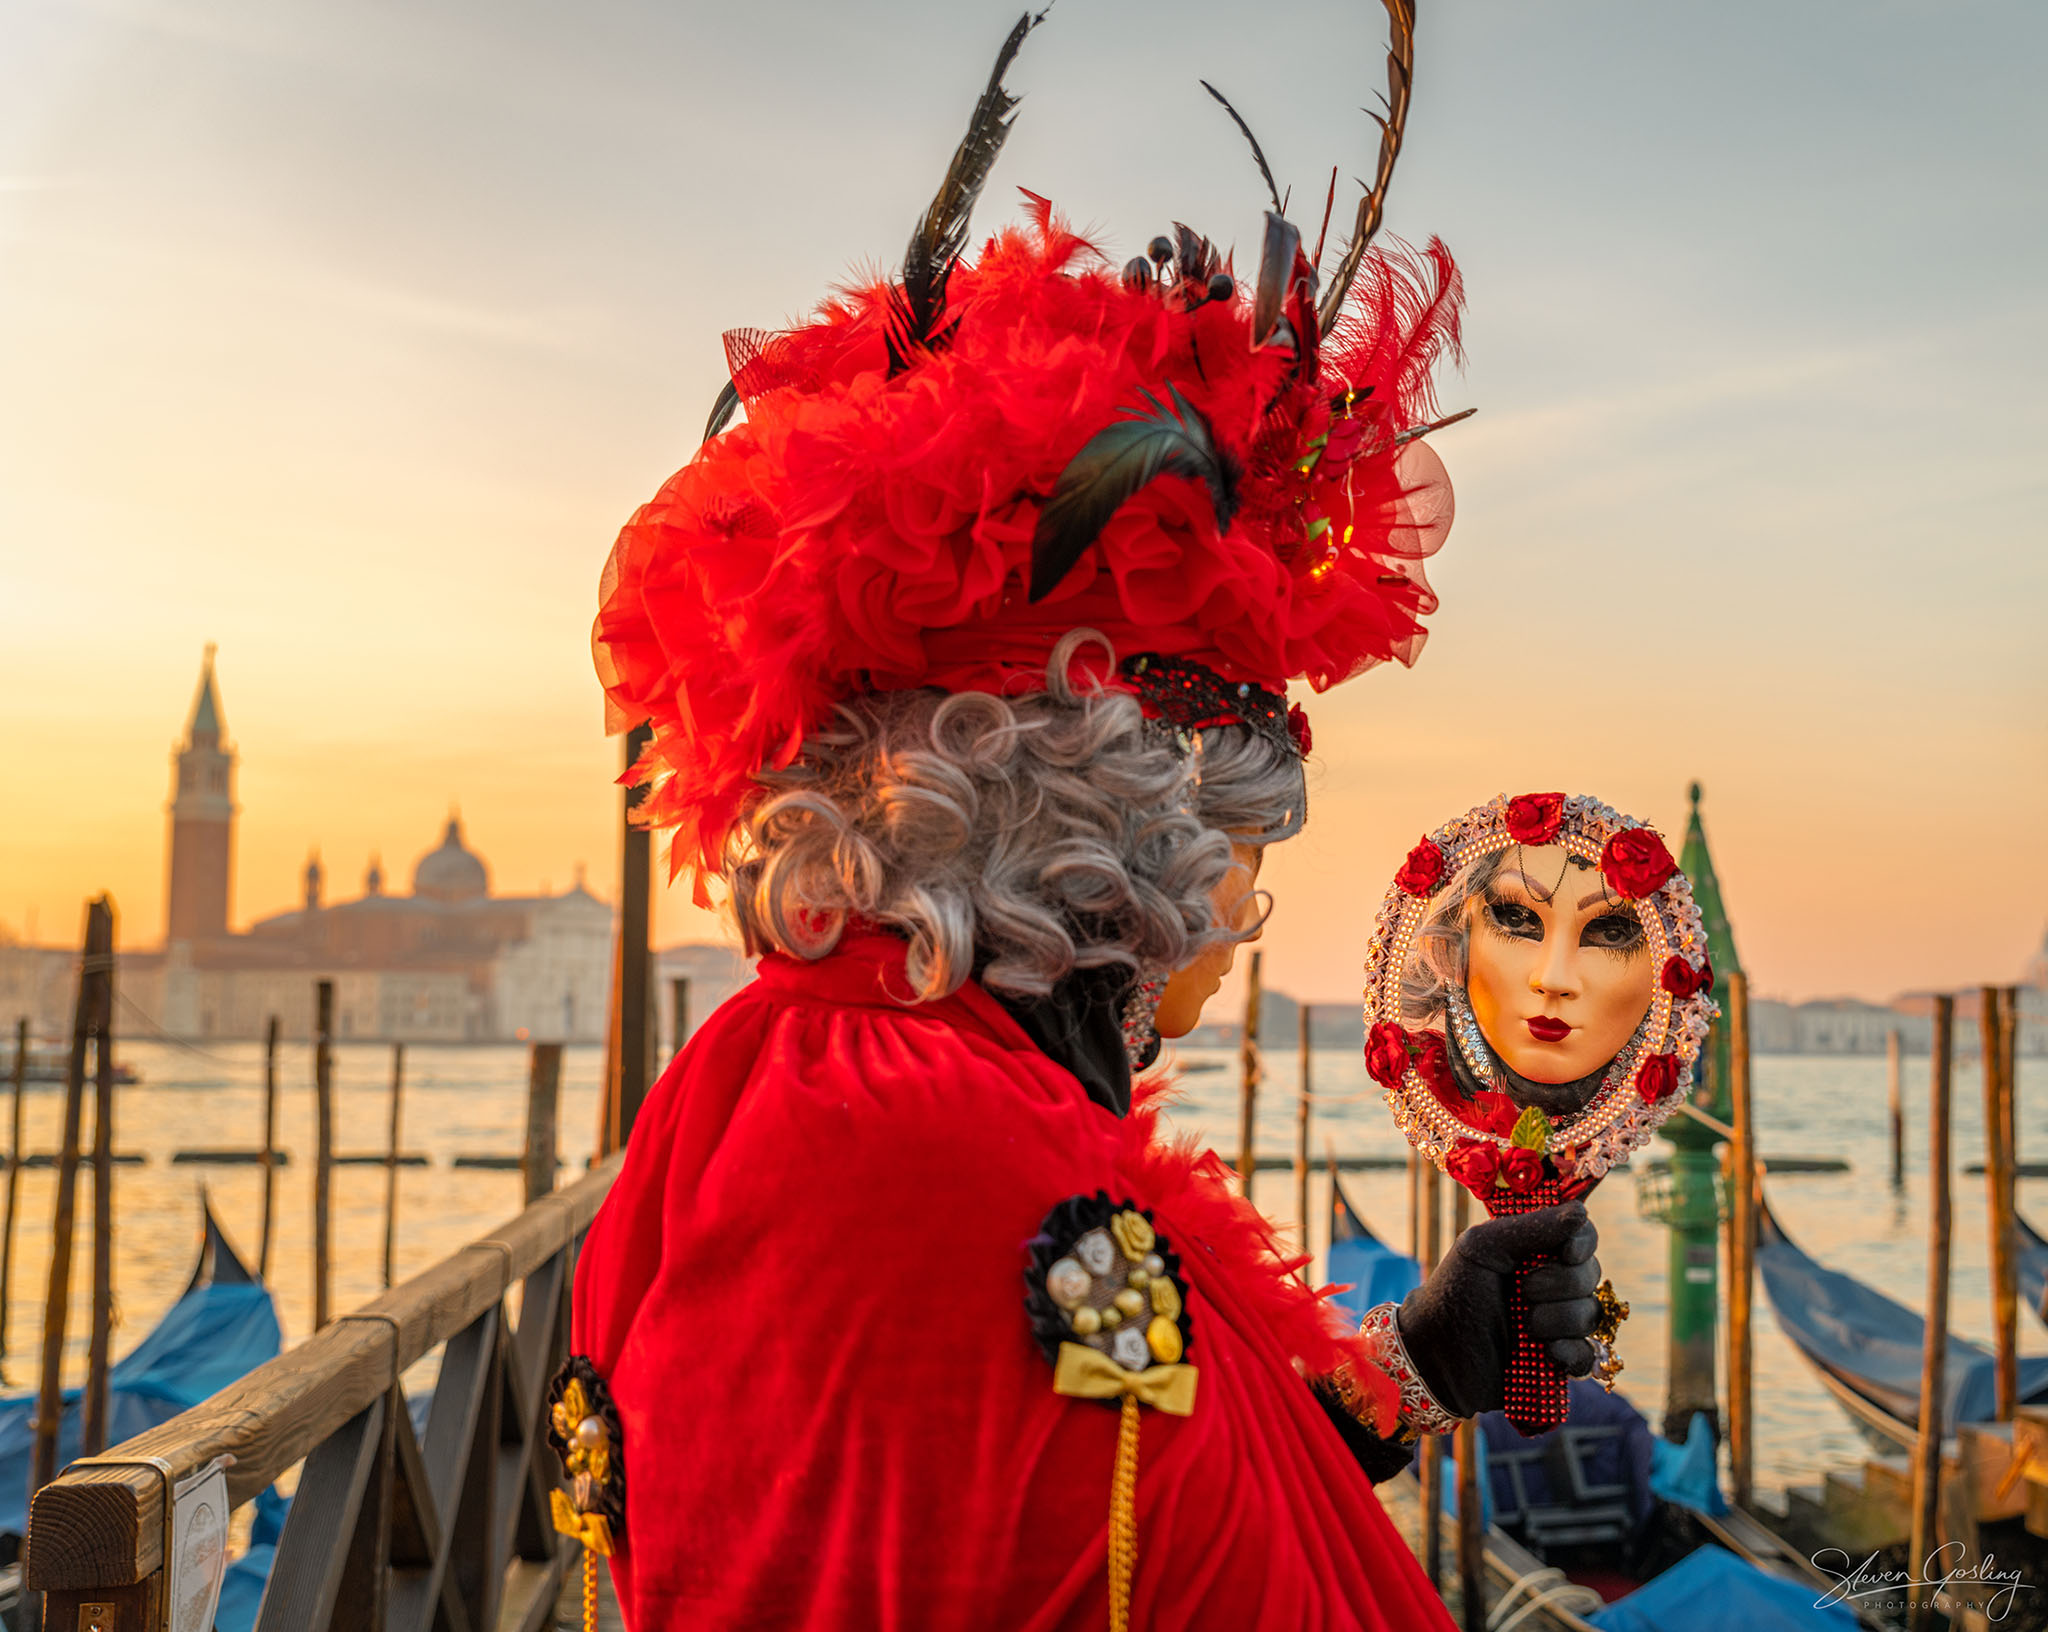 Ballet & Ball Gowns Photography Workshop at the Venice Carnival 117